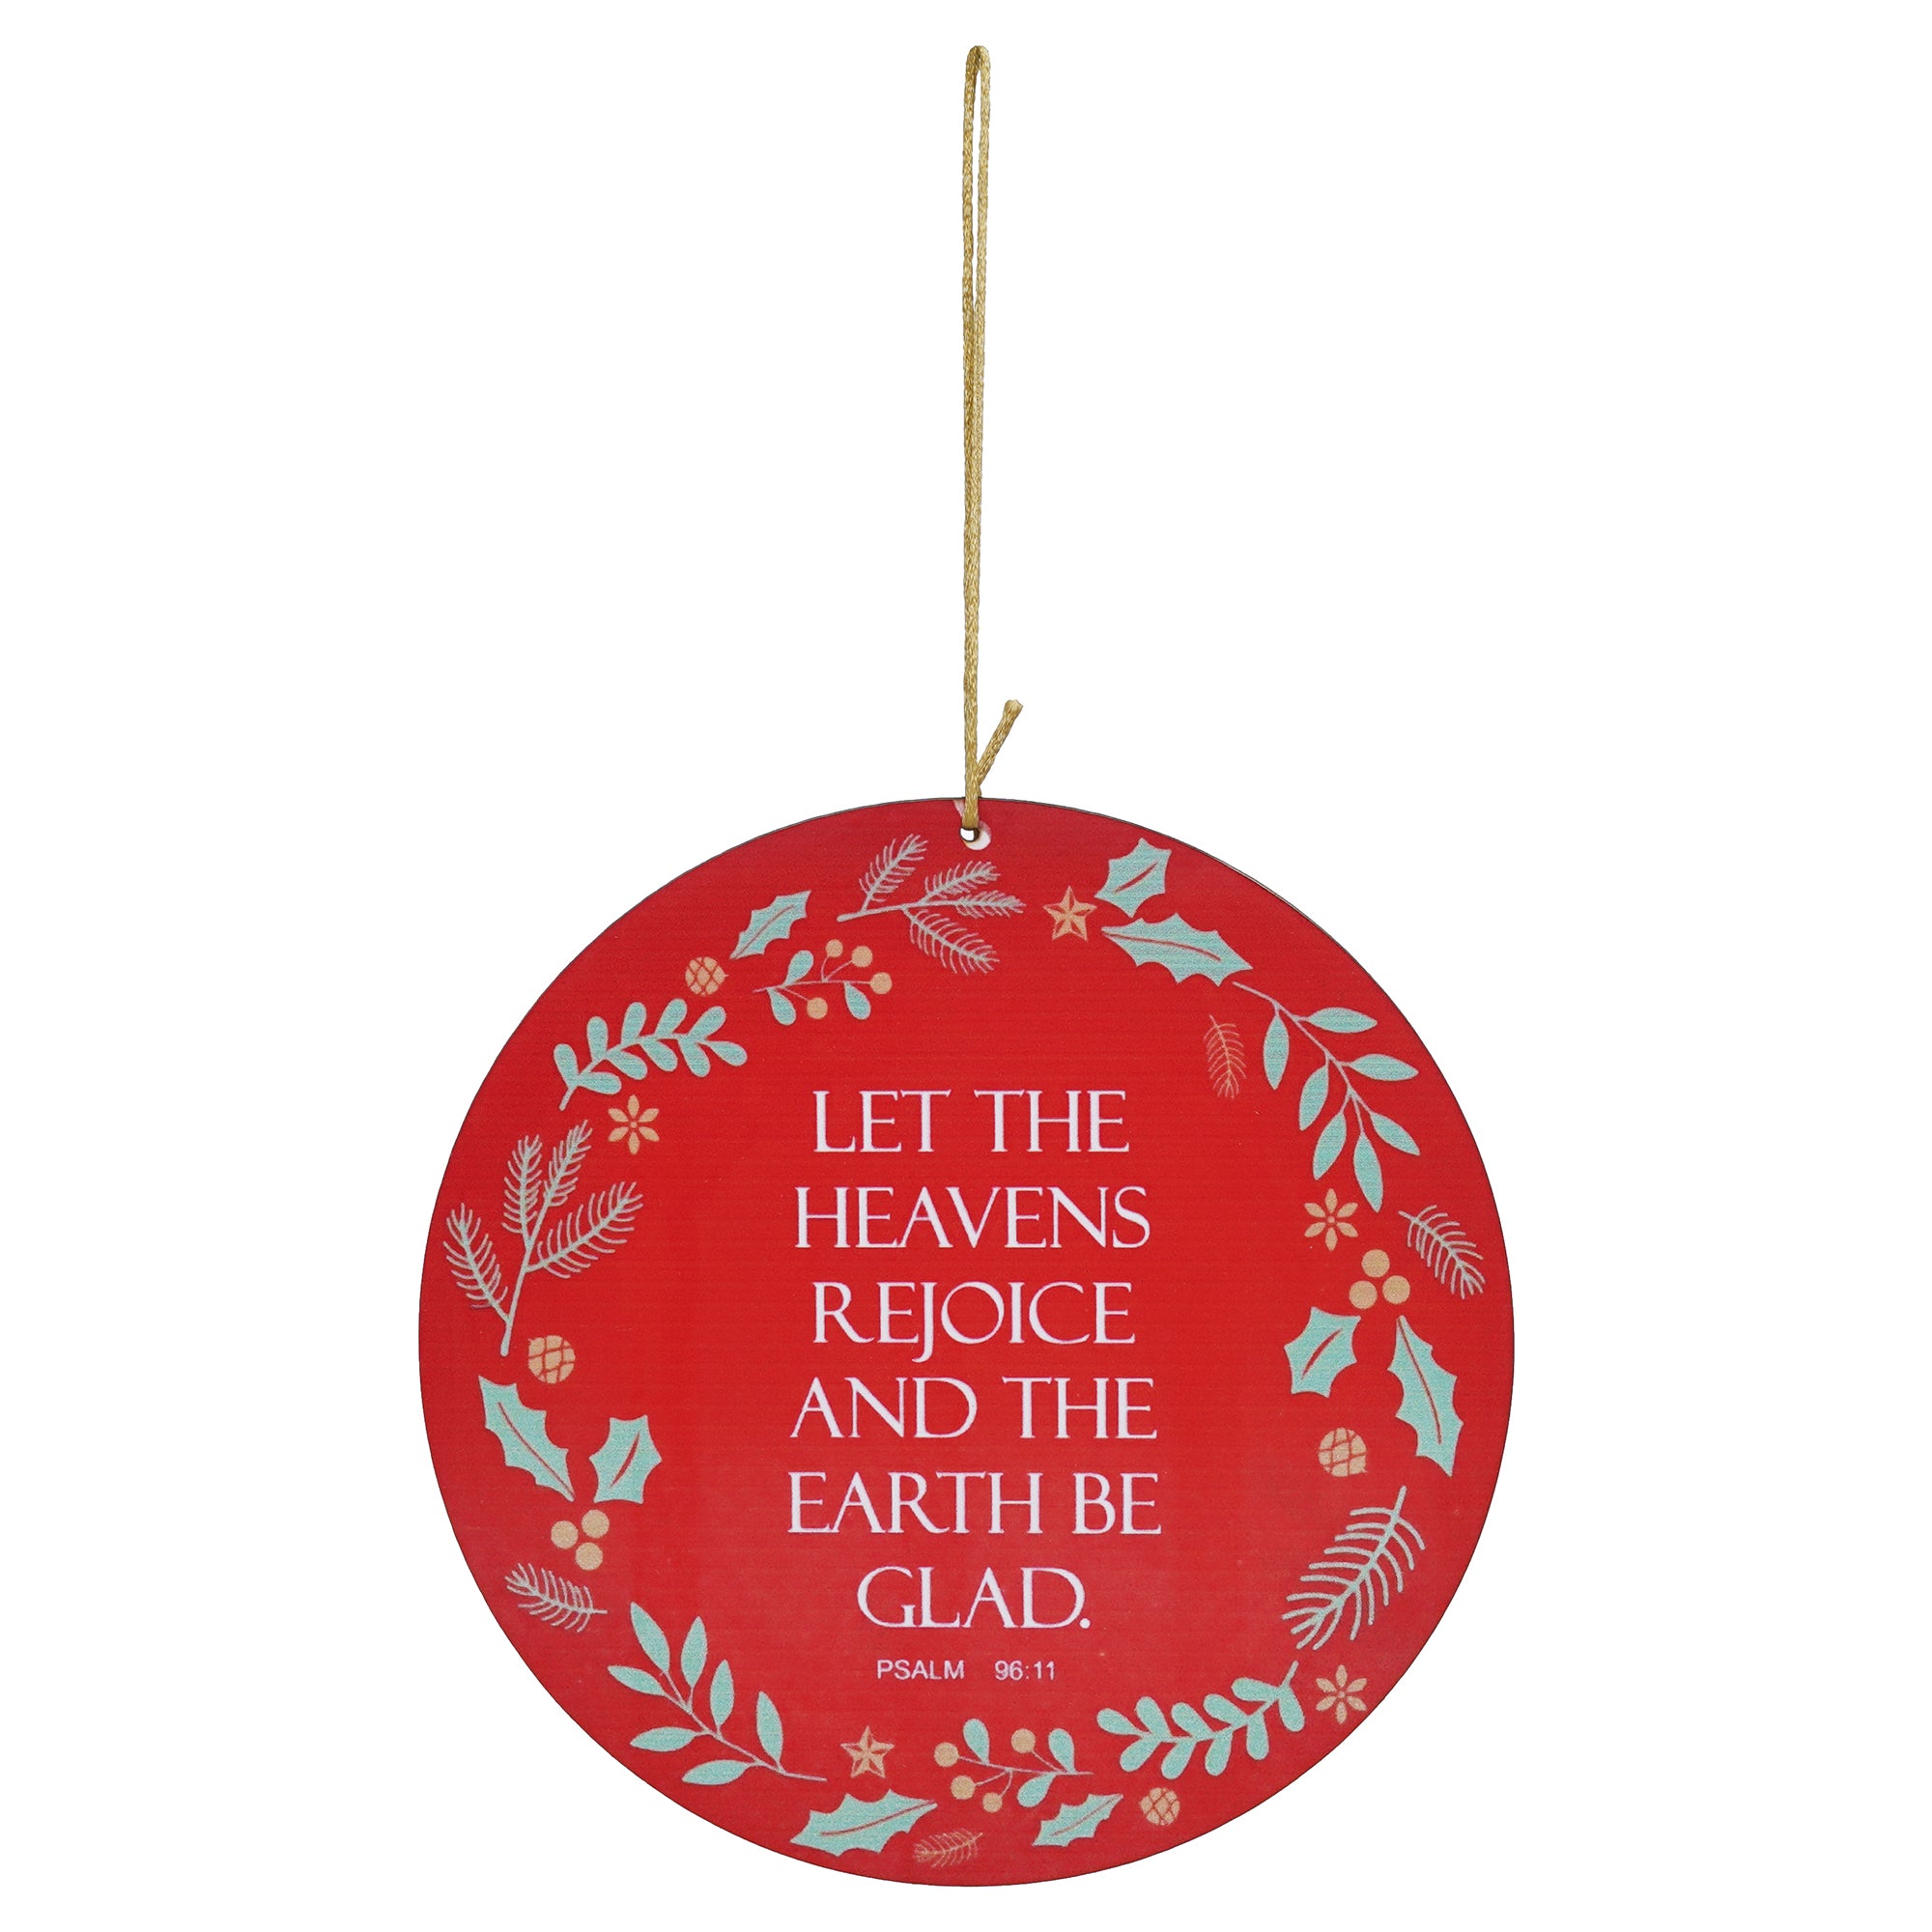 eCraftIndia "LET THE HEAVENS REJOICE AND THE EARTH BE GLAD. PSALM 96:11" Printed Merry Christmas Wooden Door Wall Hanging Ornaments for Home Decoration (Red, Green, White) 2